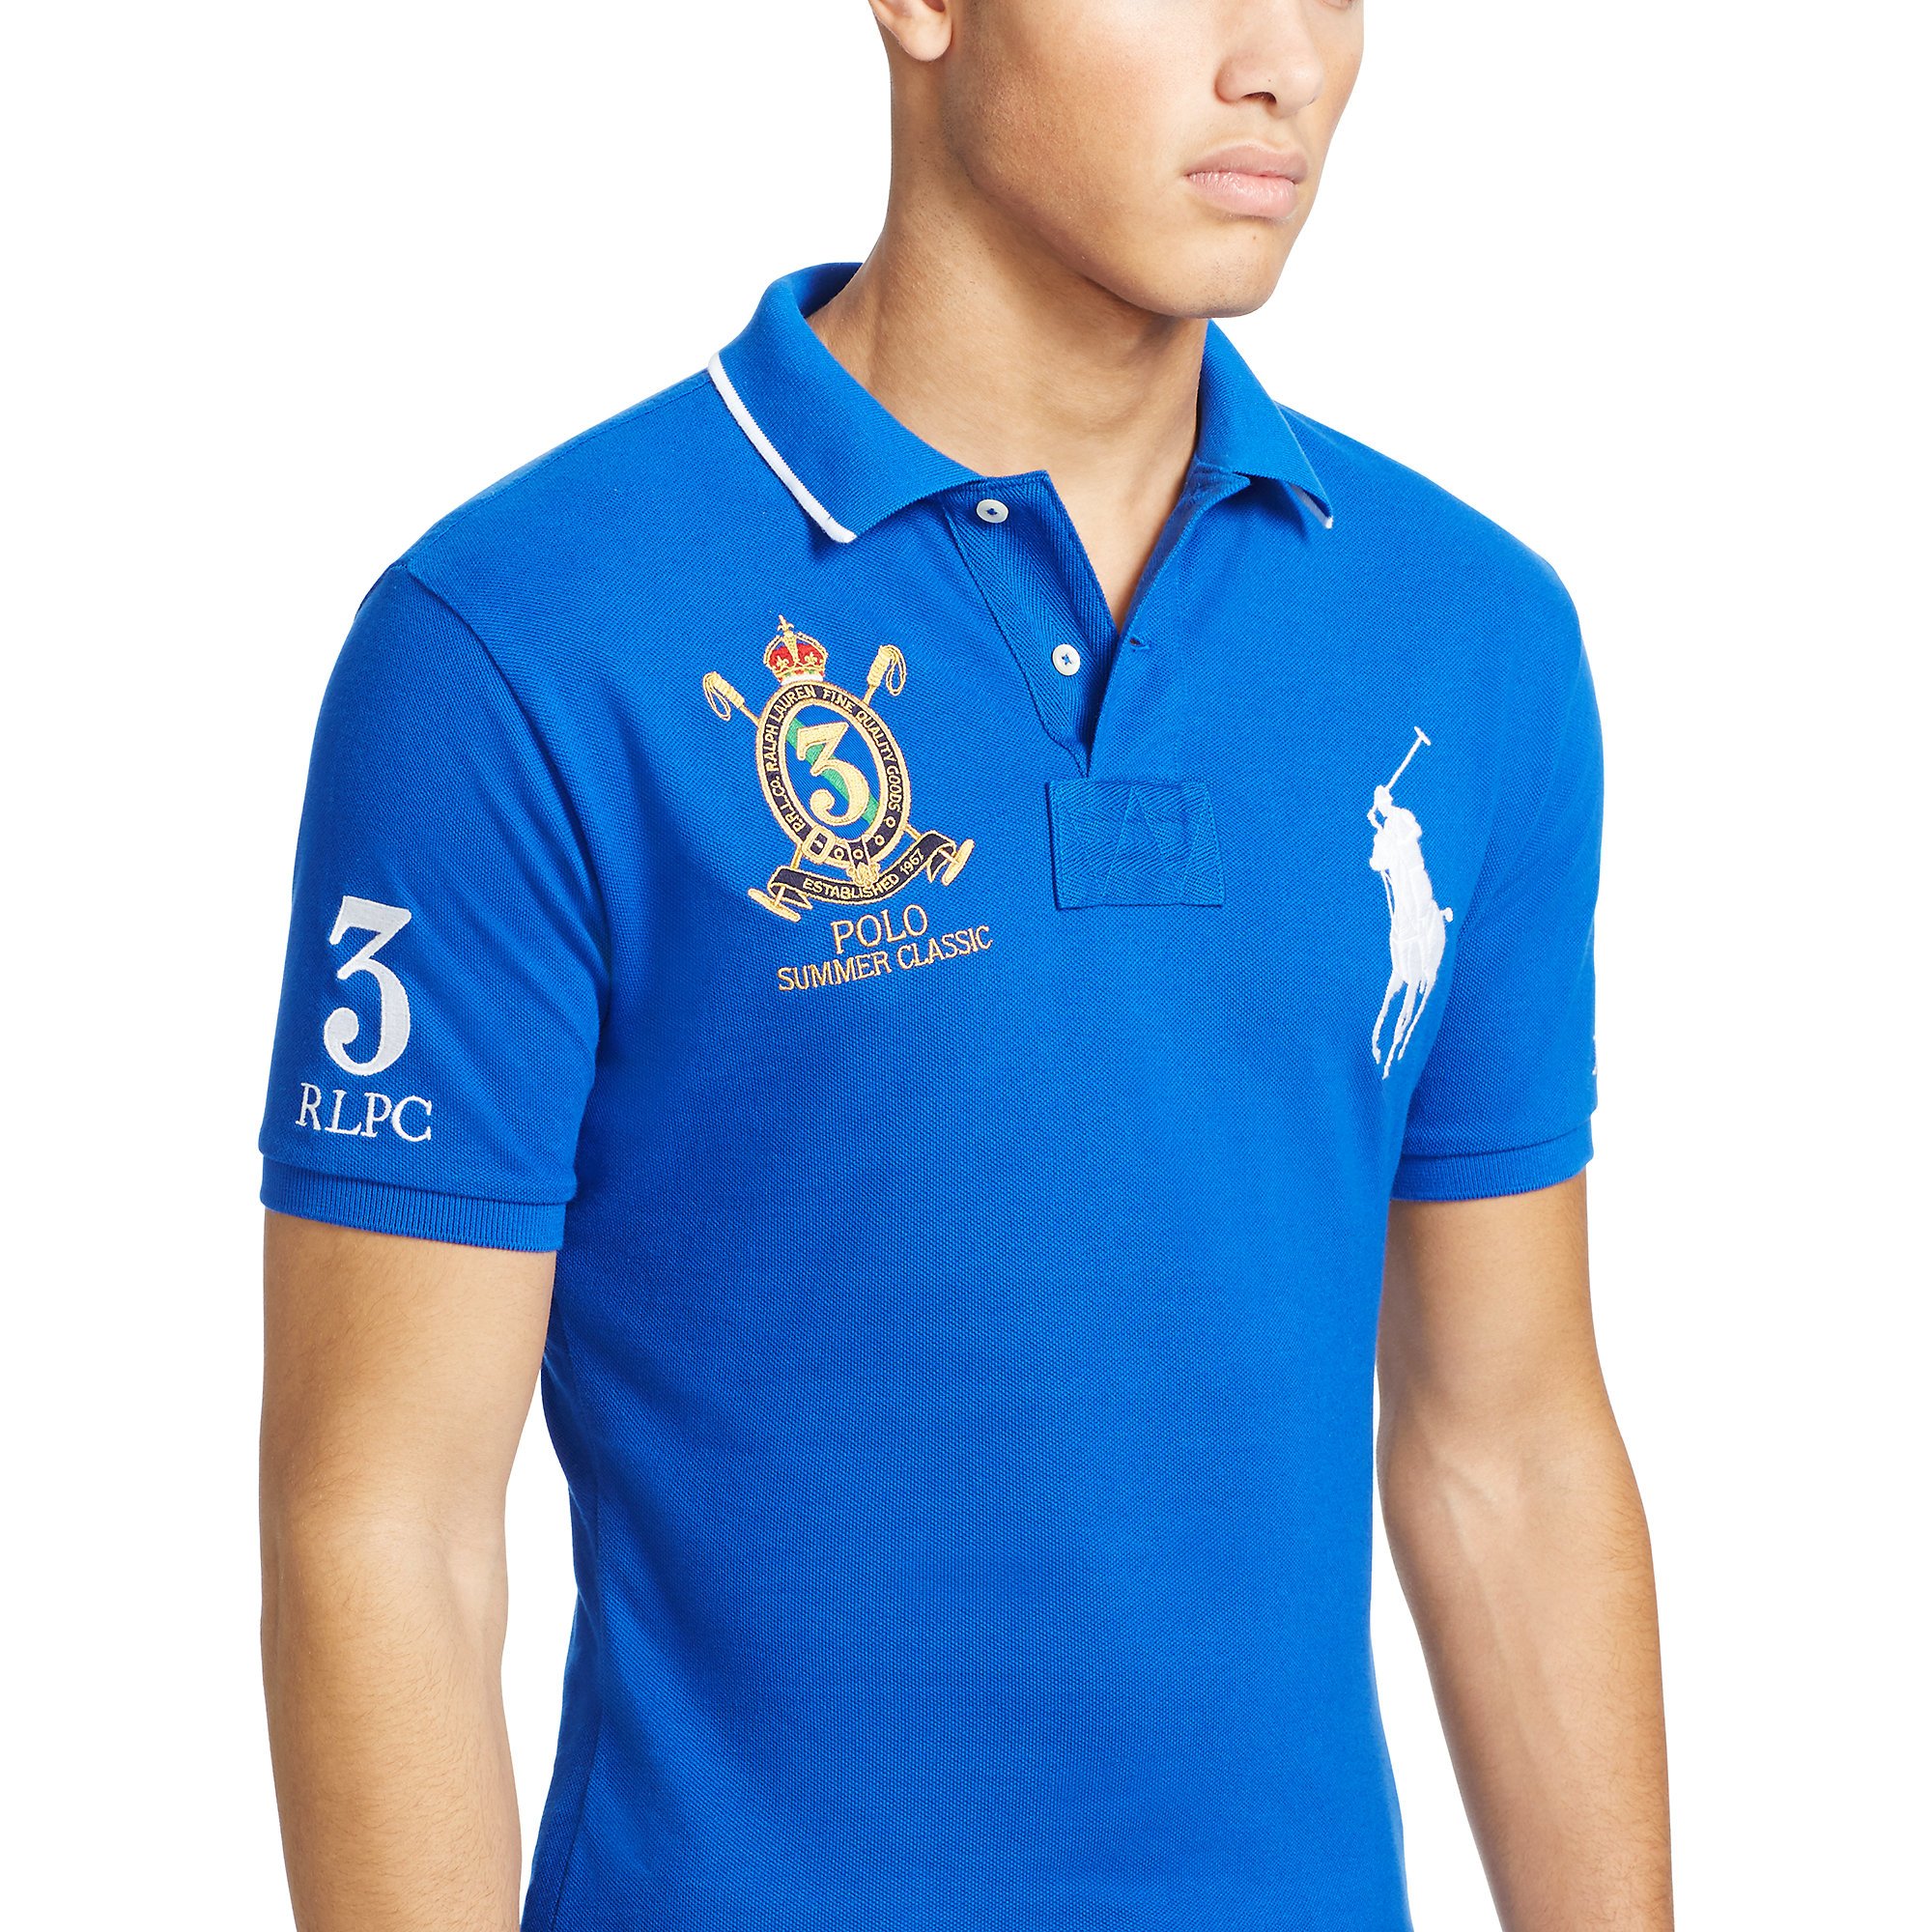 Lyst - Polo Ralph Lauren Custom-fit Big Pony Polo Shirt in Blue for Men